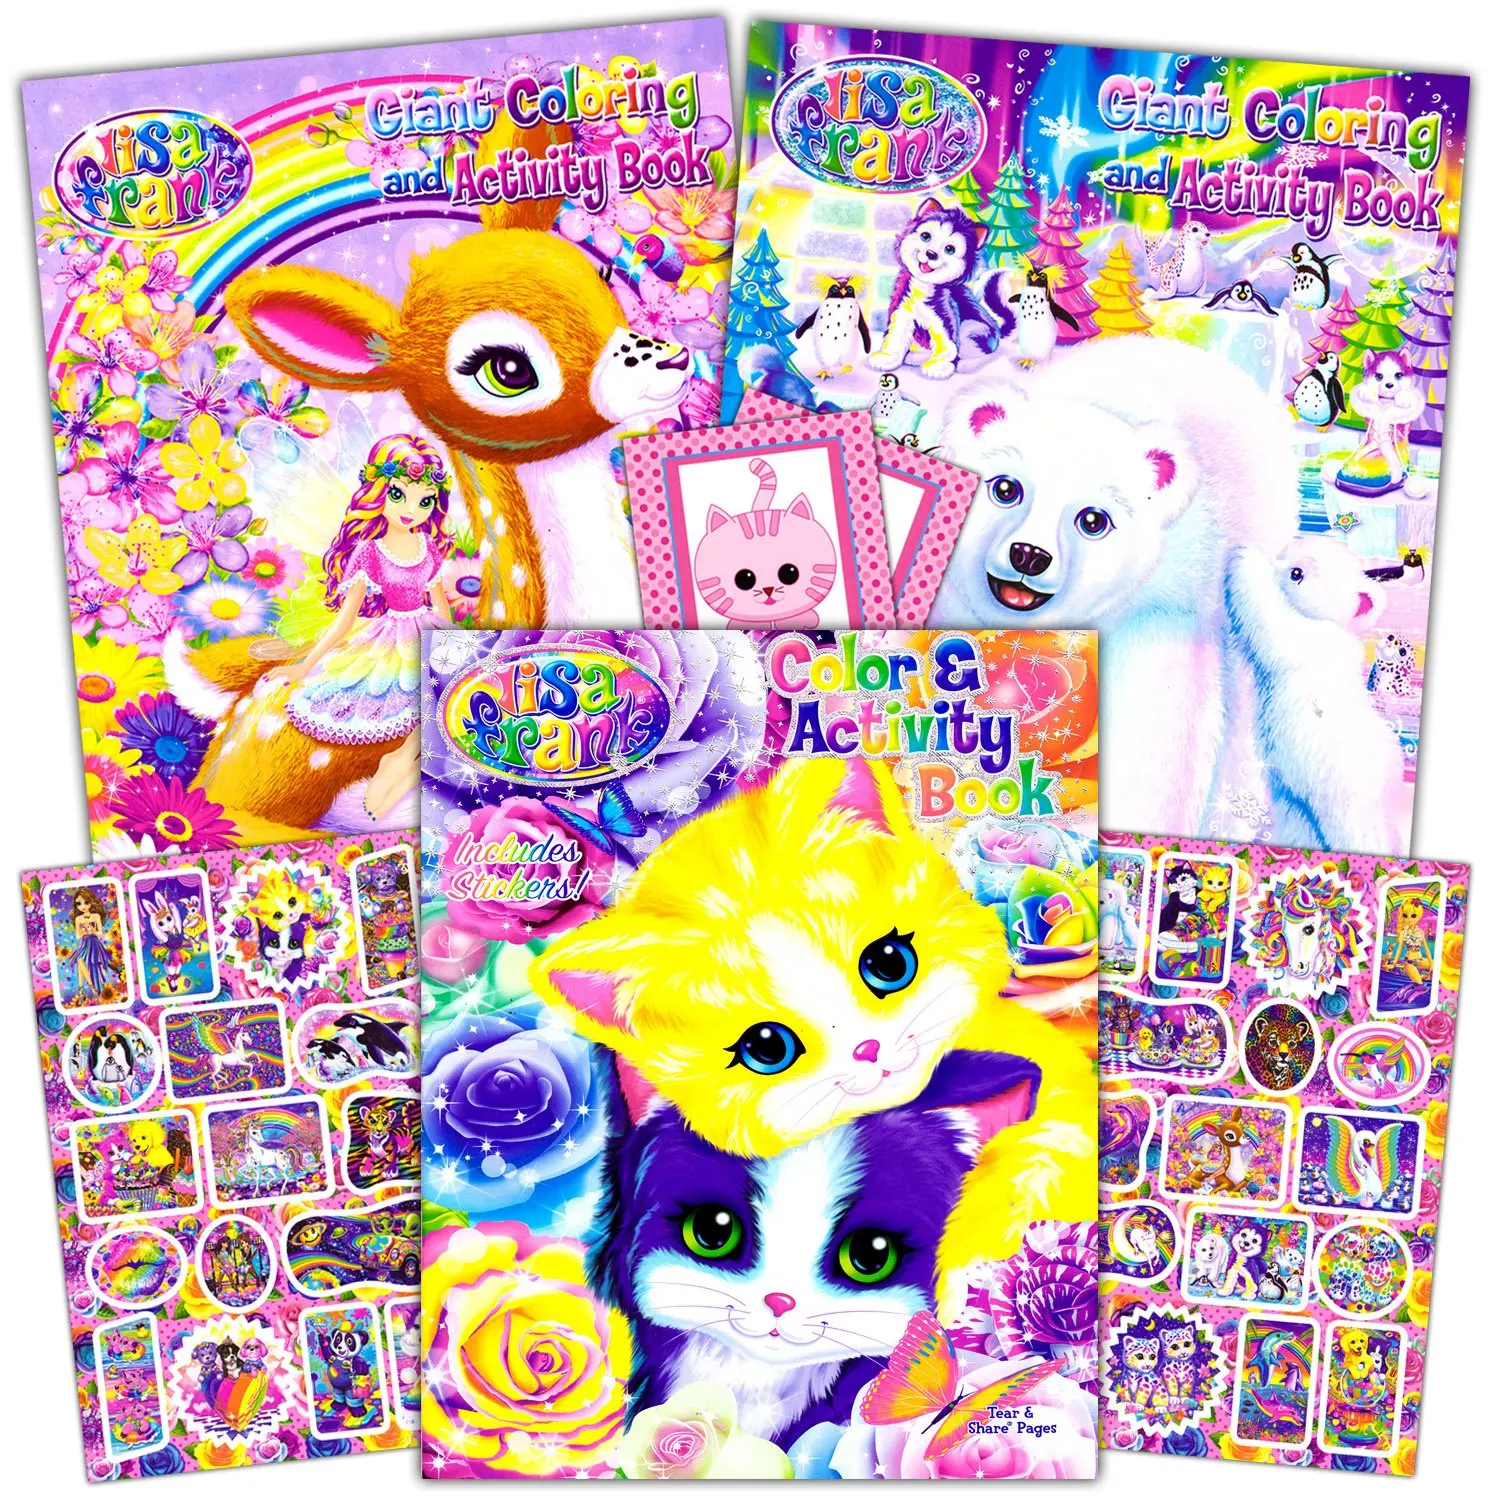 Download Buy Lisa Frank Coloring Book And Stickers Super Set 3 Books With Over 30 Lisa Frank Stickers In Cheap Price On M Alibaba Com